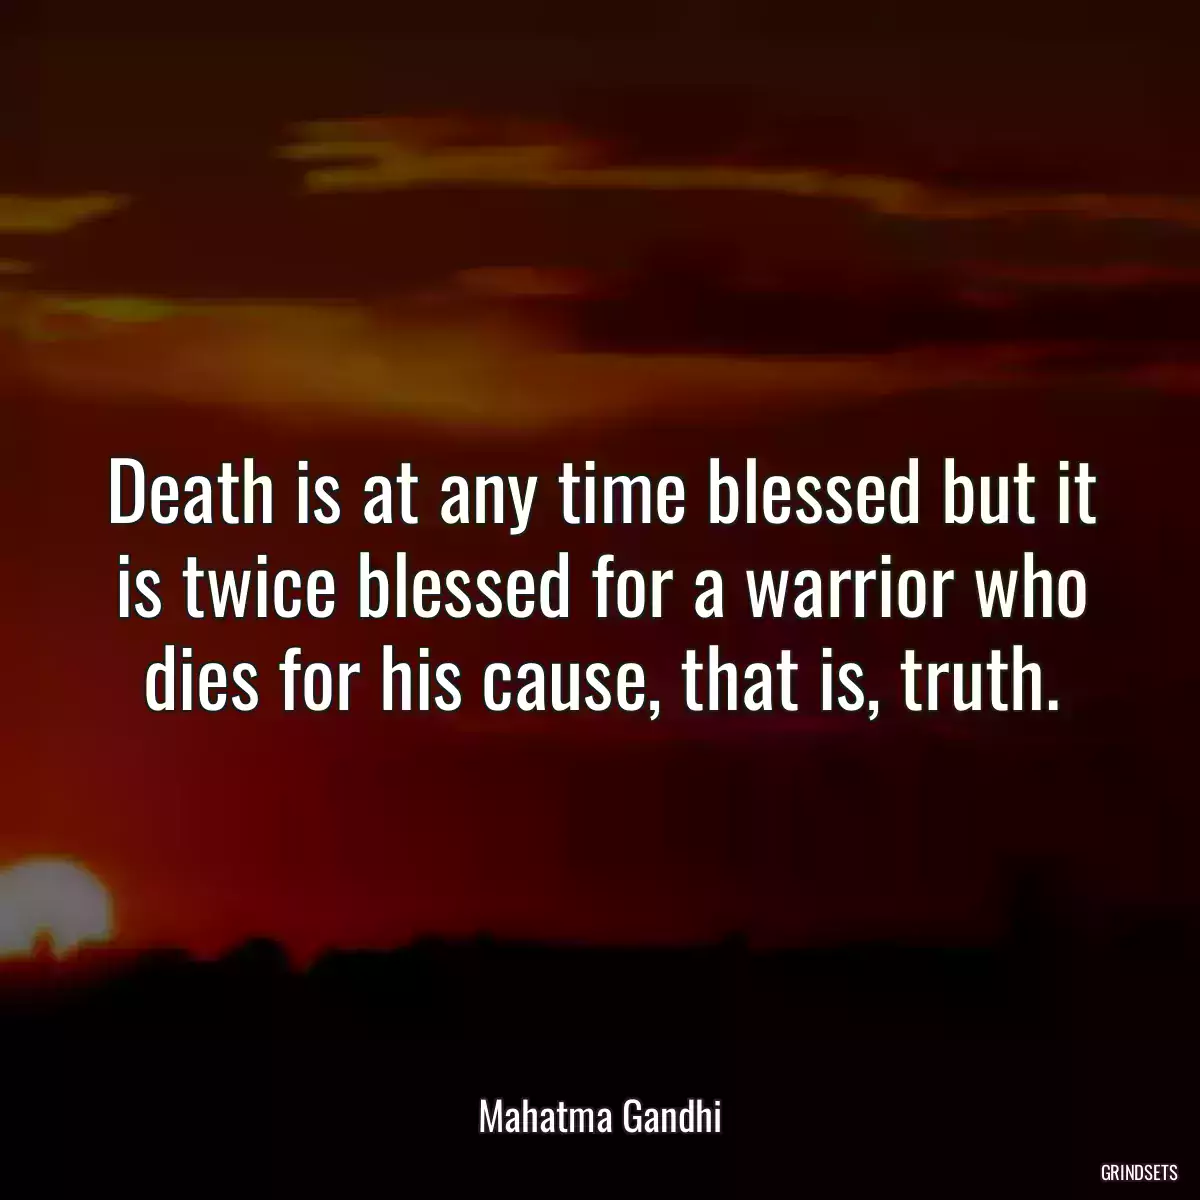 Death is at any time blessed but it is twice blessed for a warrior who dies for his cause, that is, truth.